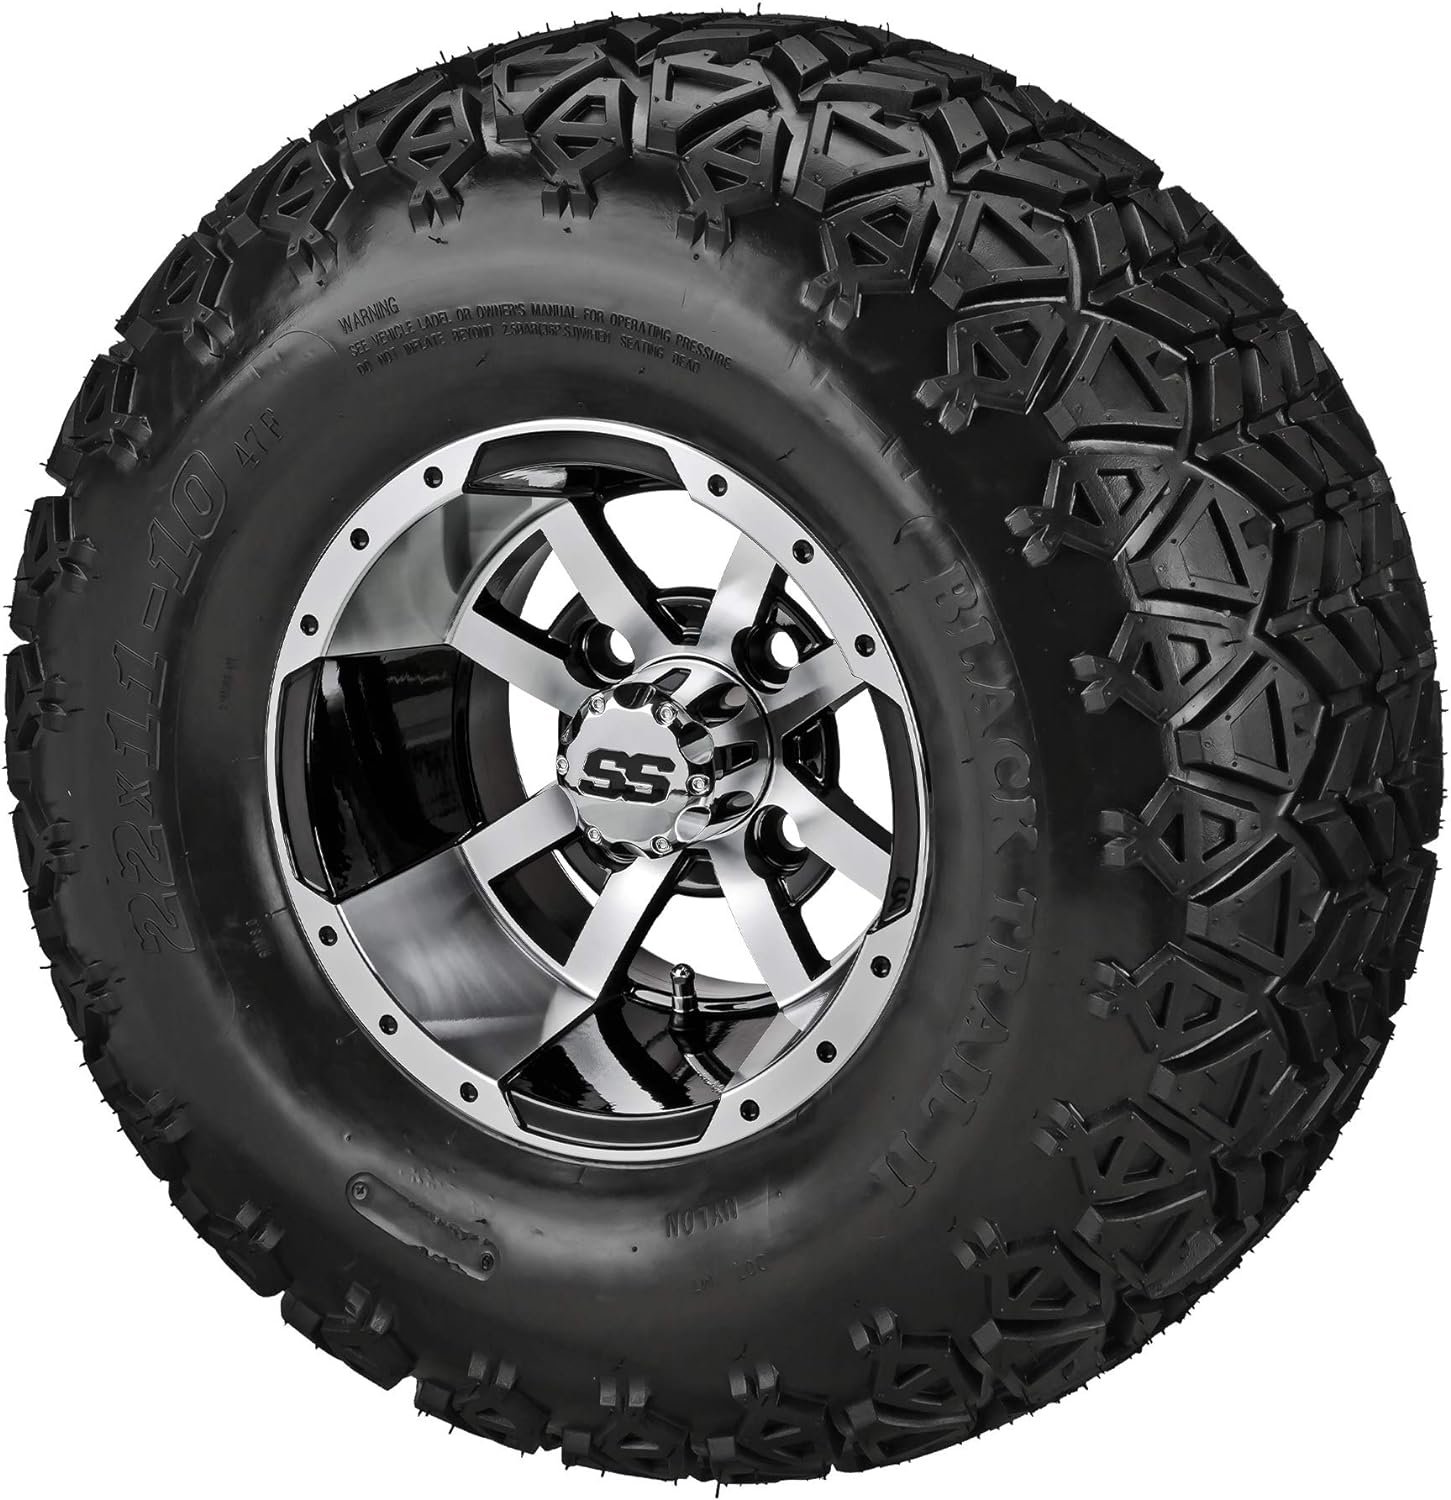 RM Cart - 10 Maltese Cross Black/Machined on 22x11-10 Black Trail II Tires (Set of 4), Fits Yamaha carts, Golf Cart Tires and Wheels Combo, Can be Used on Lawn Mowers and ATVs